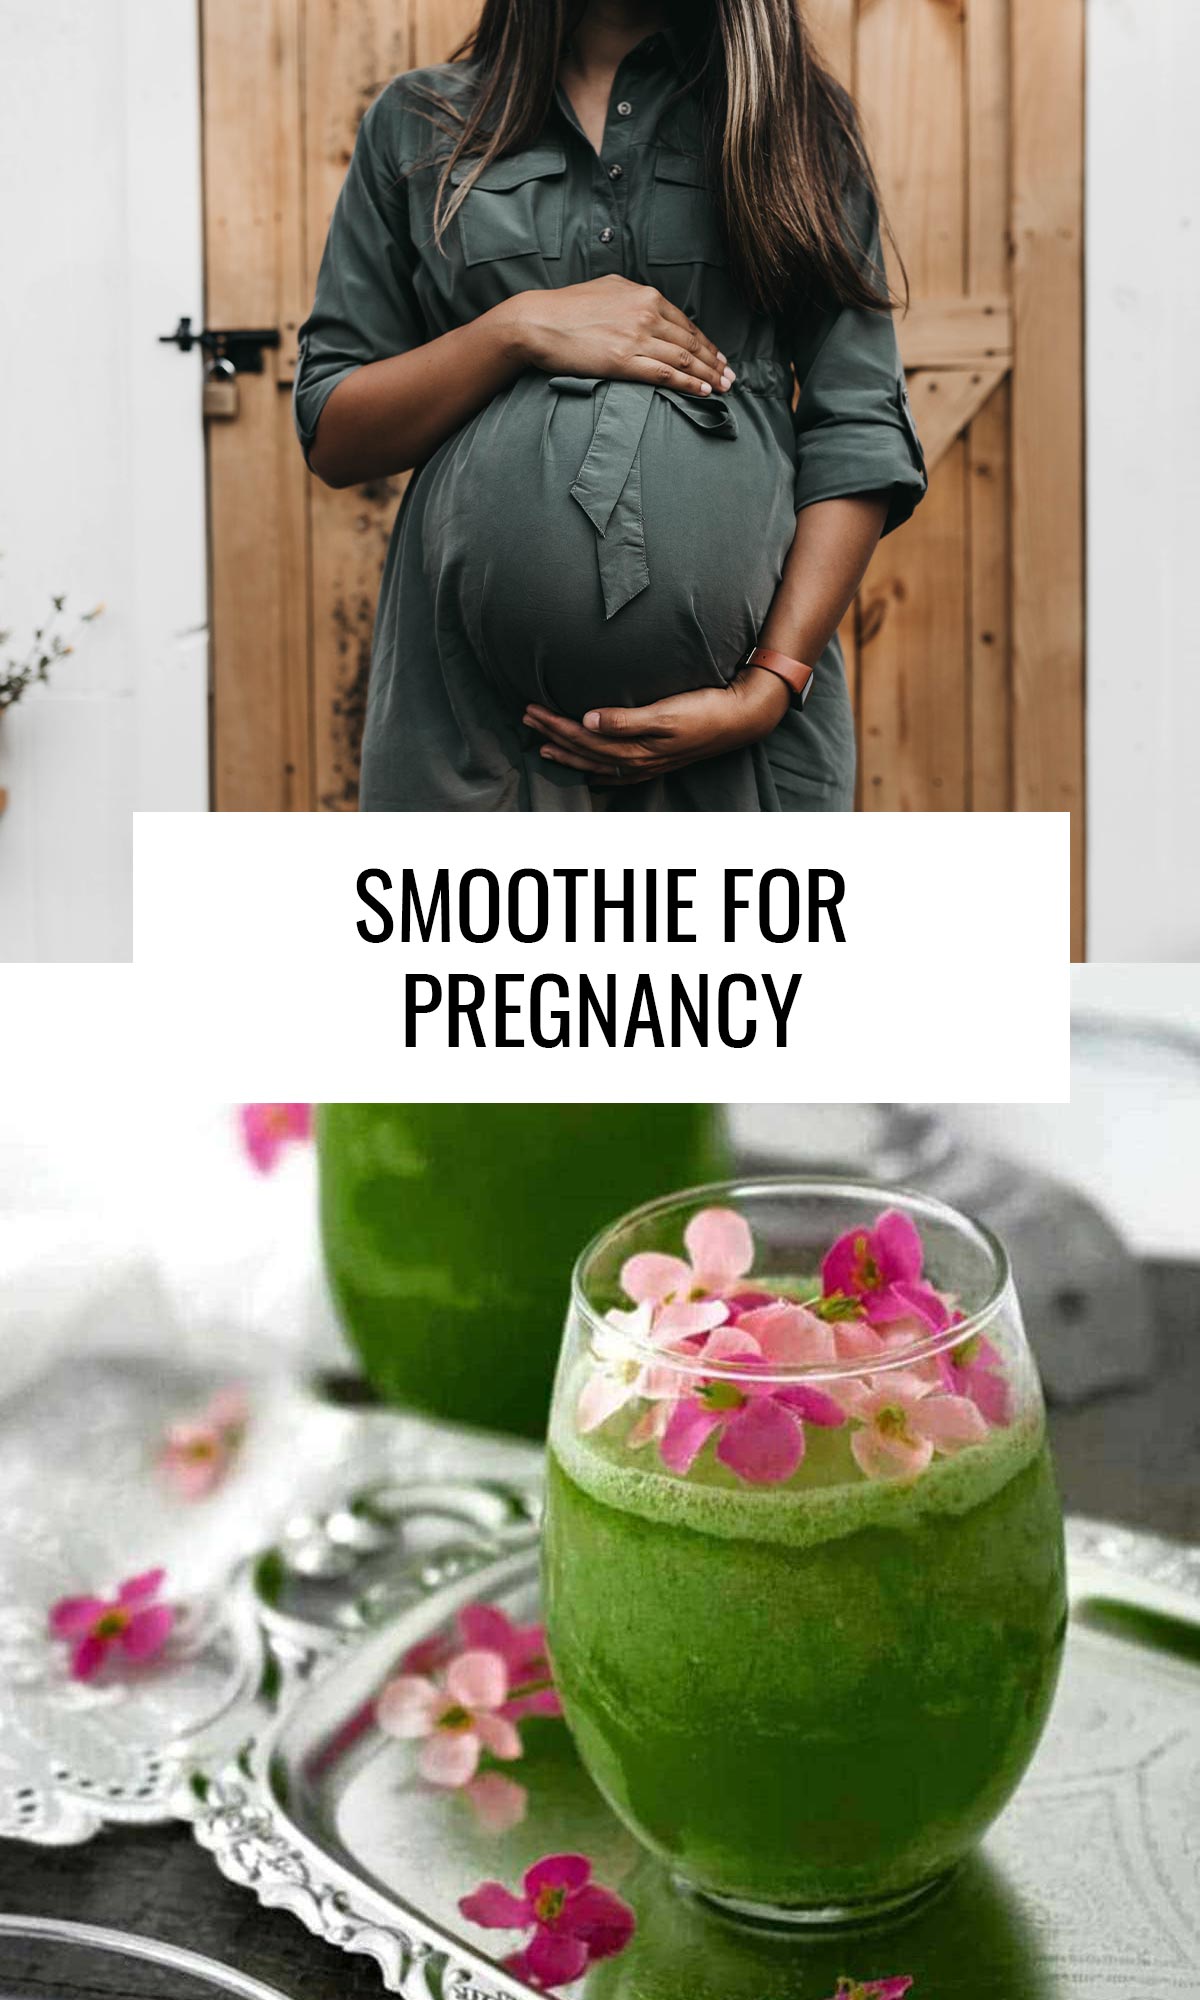 words Smoothie for Pregnancy in a white box overtop a pregnant person holding their belly and a green smoothie in a round glass.